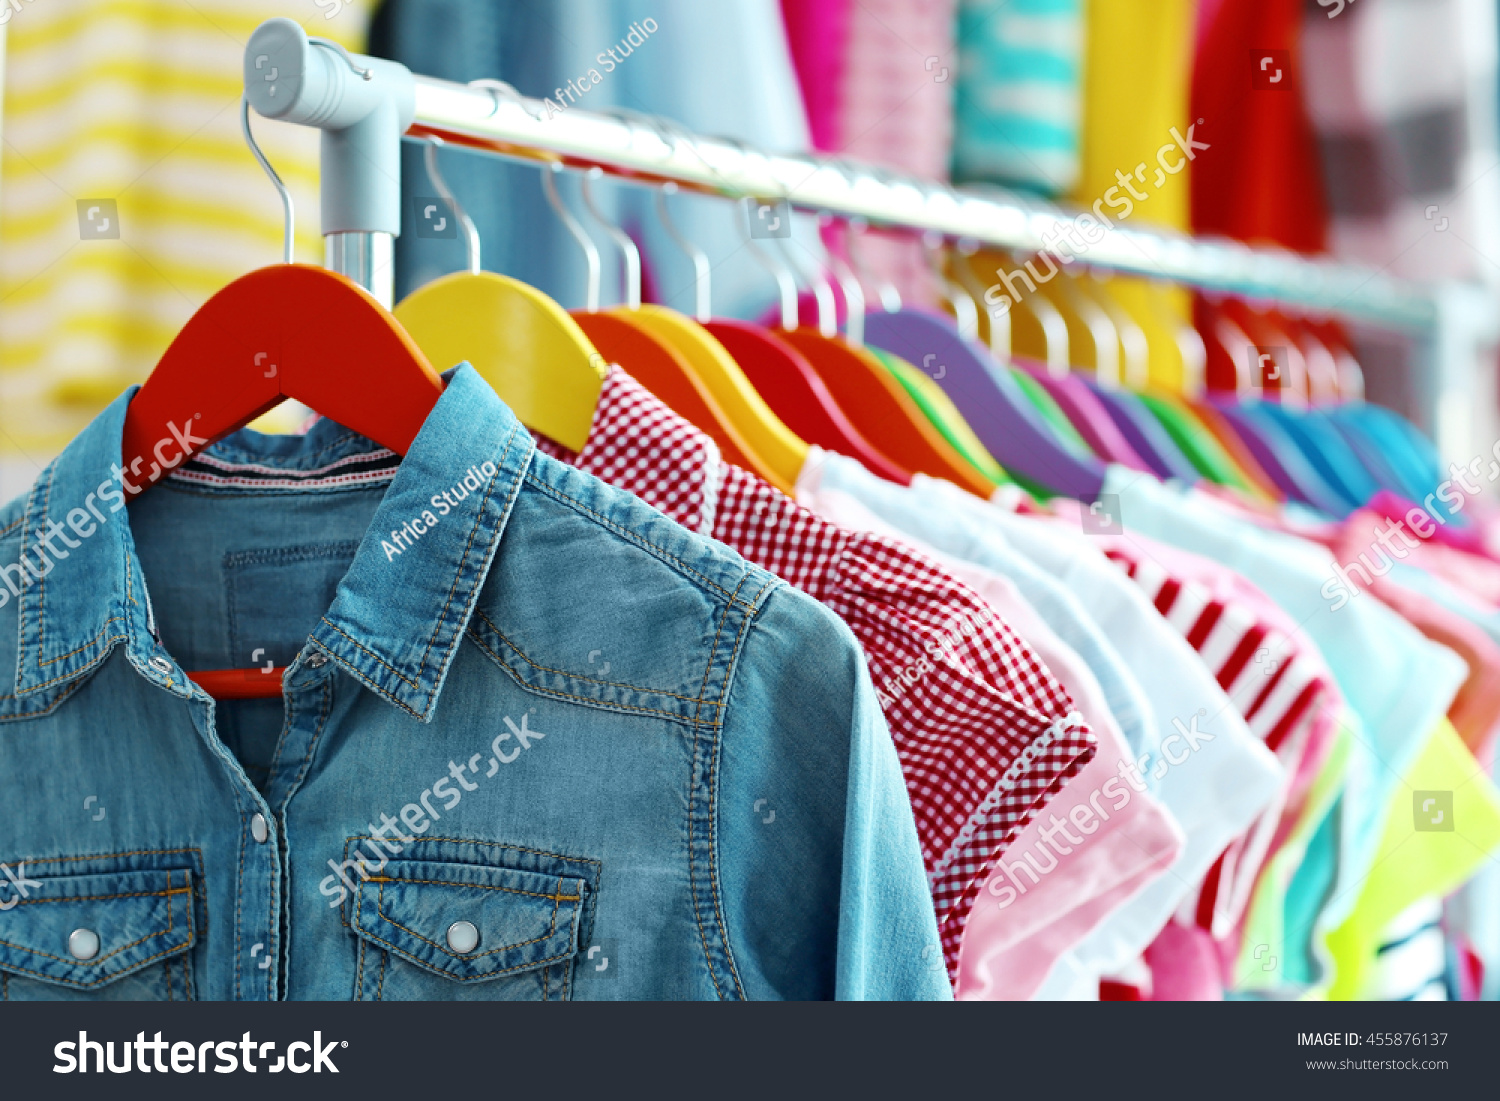 http://www.clotheslinearlington.org/wp-content/uploads/2017/09/stock-photo-children-clothes-hanging-on-hangers-in-the-shop-455876137.jpg